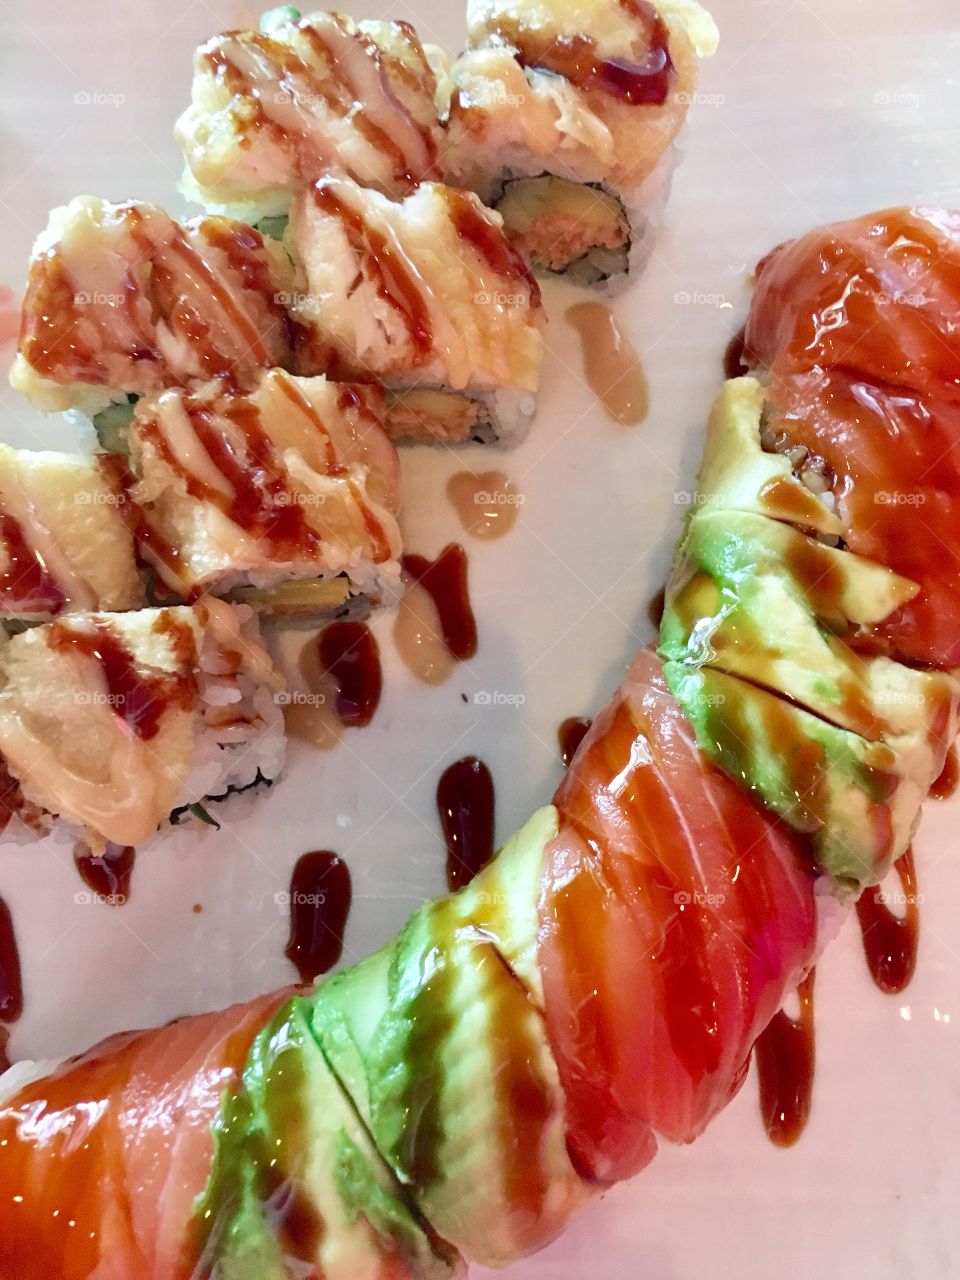 sushi for lunch is the best 👌🏼